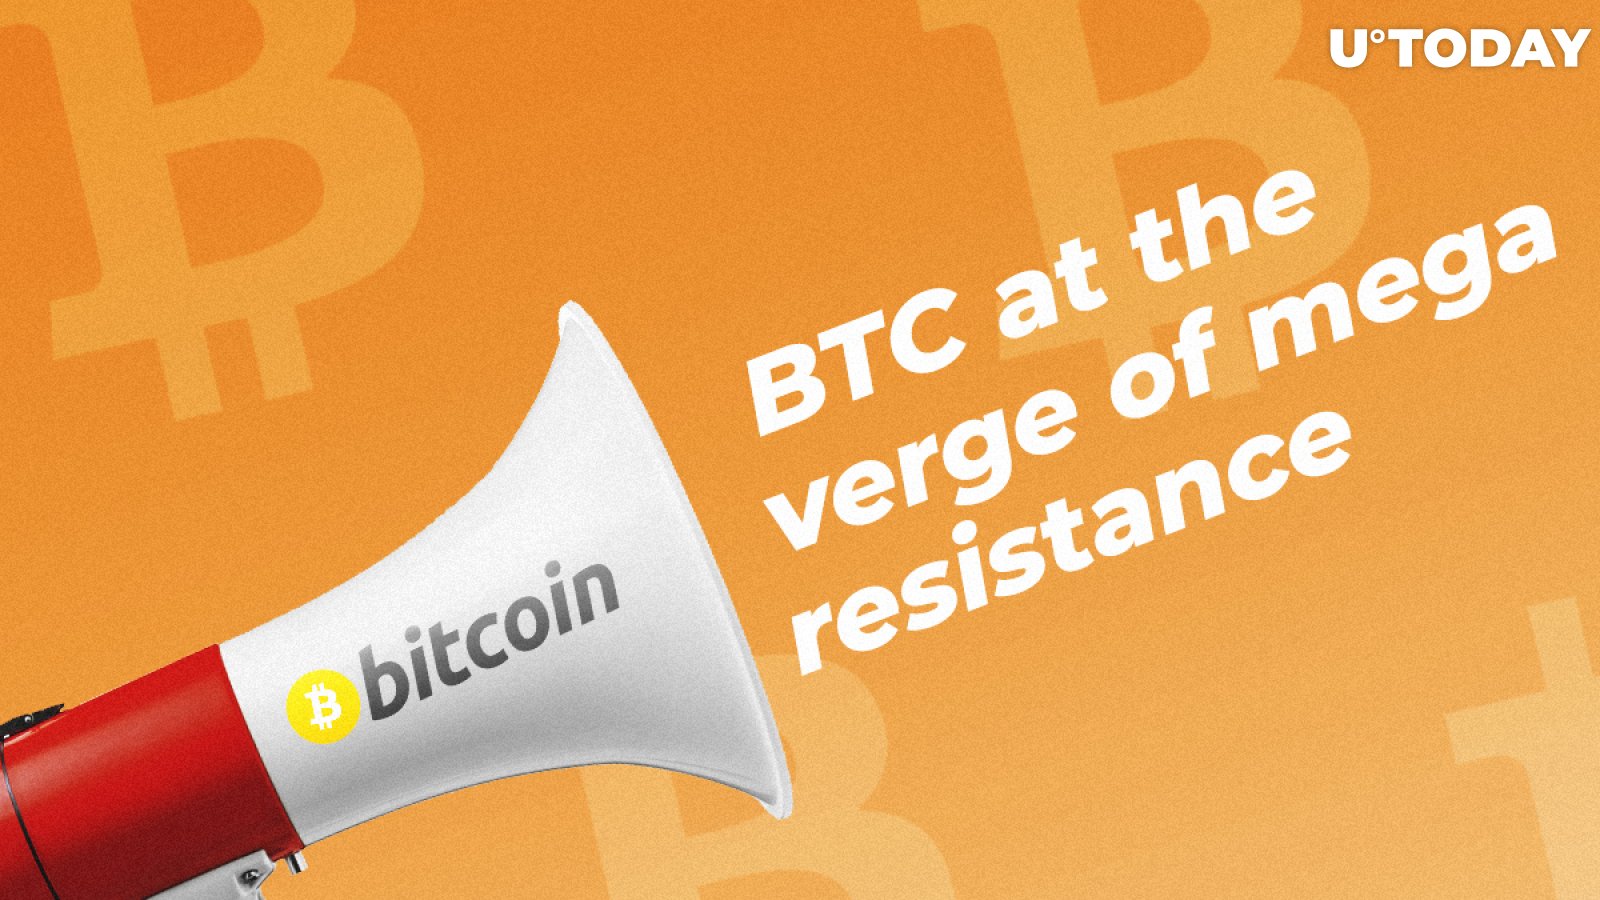 Bitcoin Price Prediction: $6,000 Is Not an Easy Target. BTC on the Verge of Mega Resistance